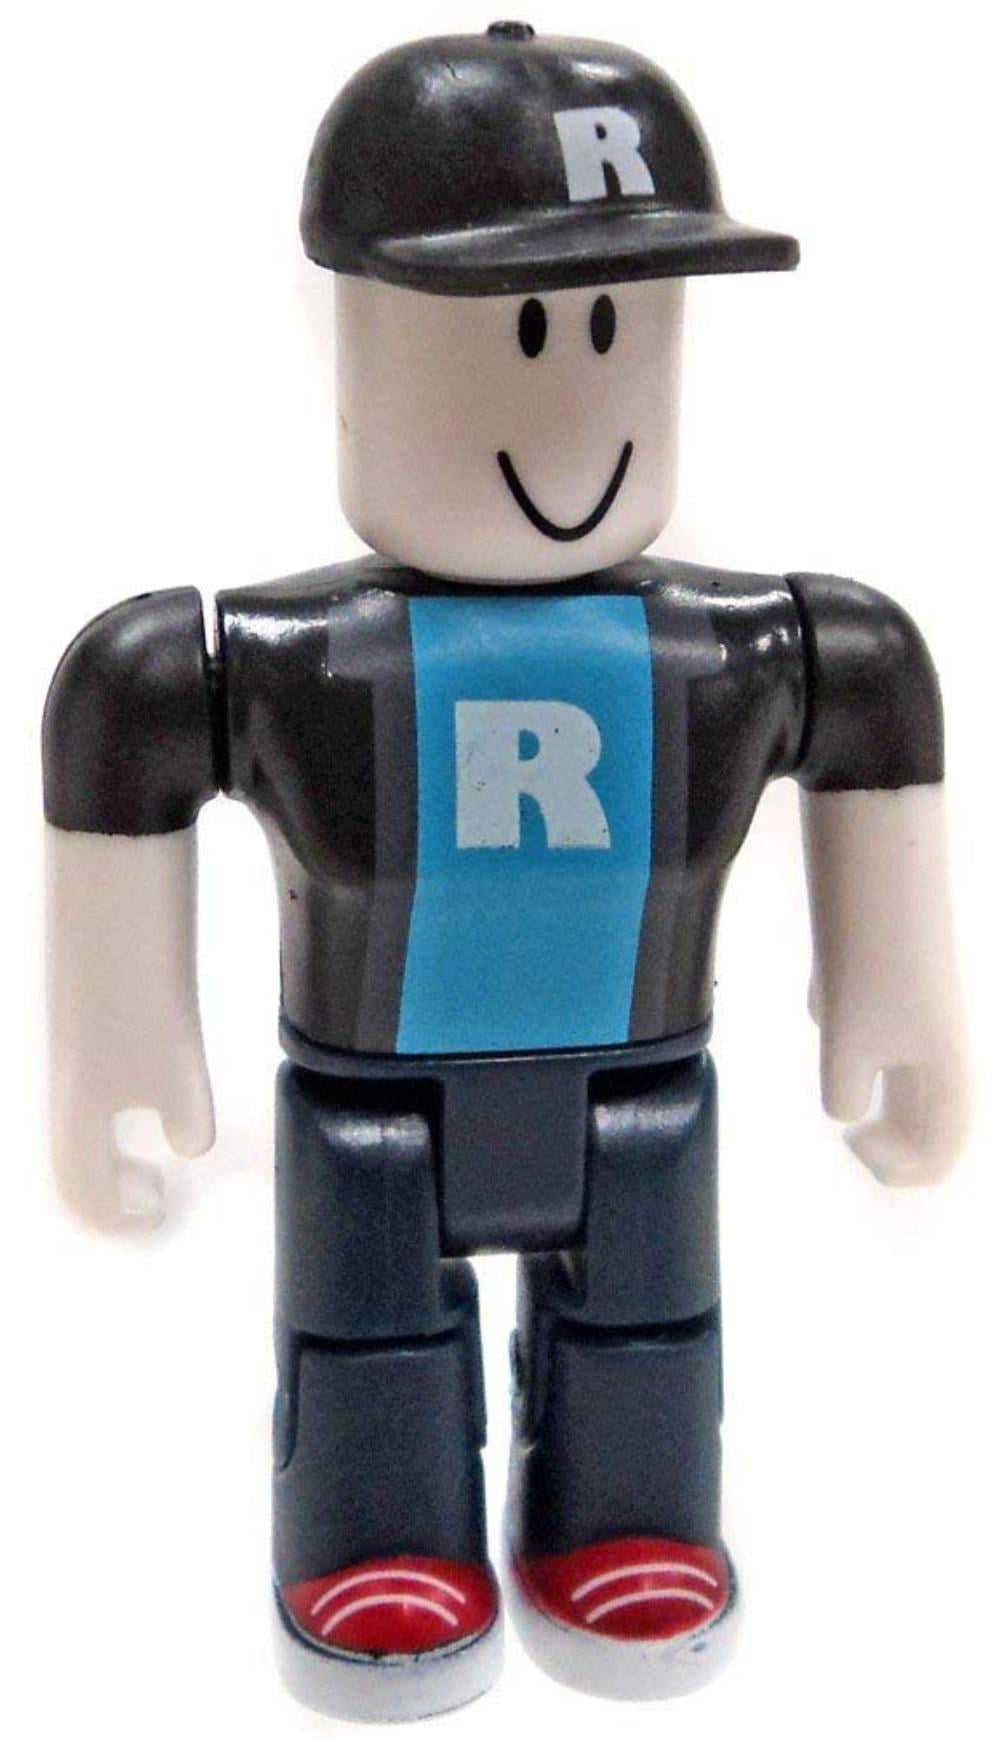 Roblox Series 2 Roblox Super Fan Action Figure Mystery Box Virtual Item Code 2 5 Figure Comes As Pictured With Online Code By Jazwares Walmart Com Walmart Com - roblox toy codes jazwares